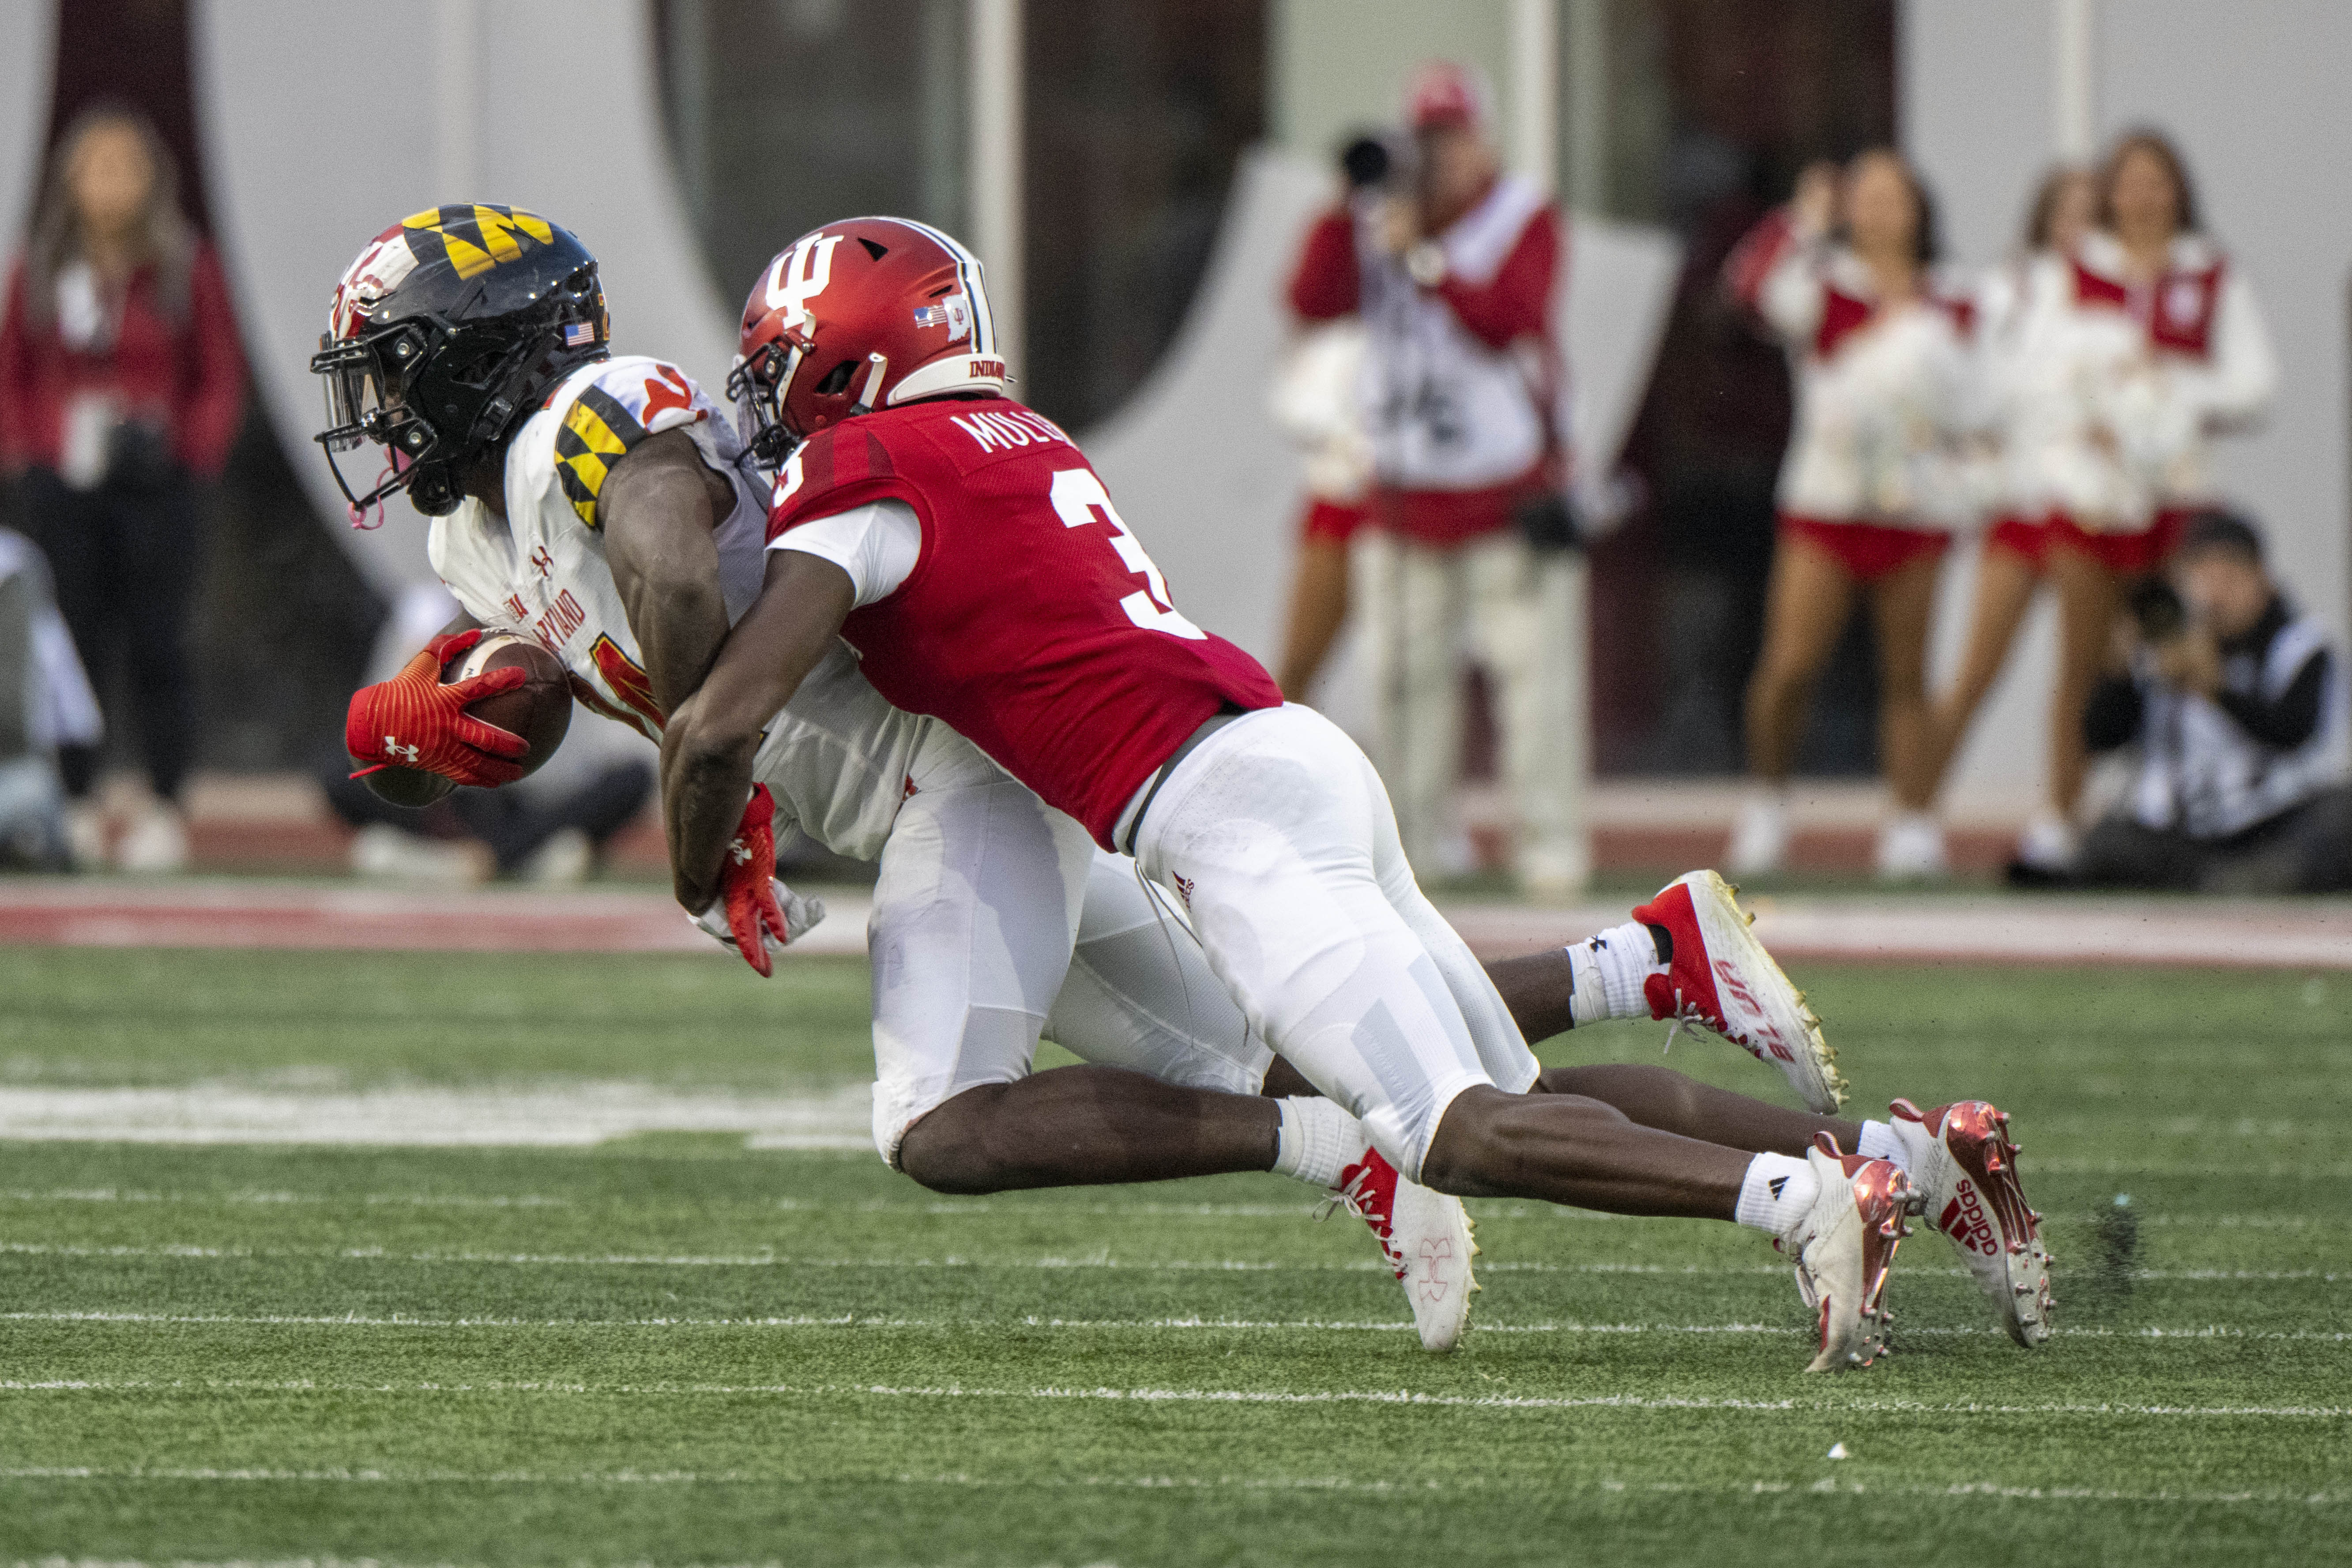 Maryland Terrapins running back Roman Hemby (24) is tackled by Indiana Hoosiers defensive back Tiawan Mullen (3) during the second half at Memorial Stadium.